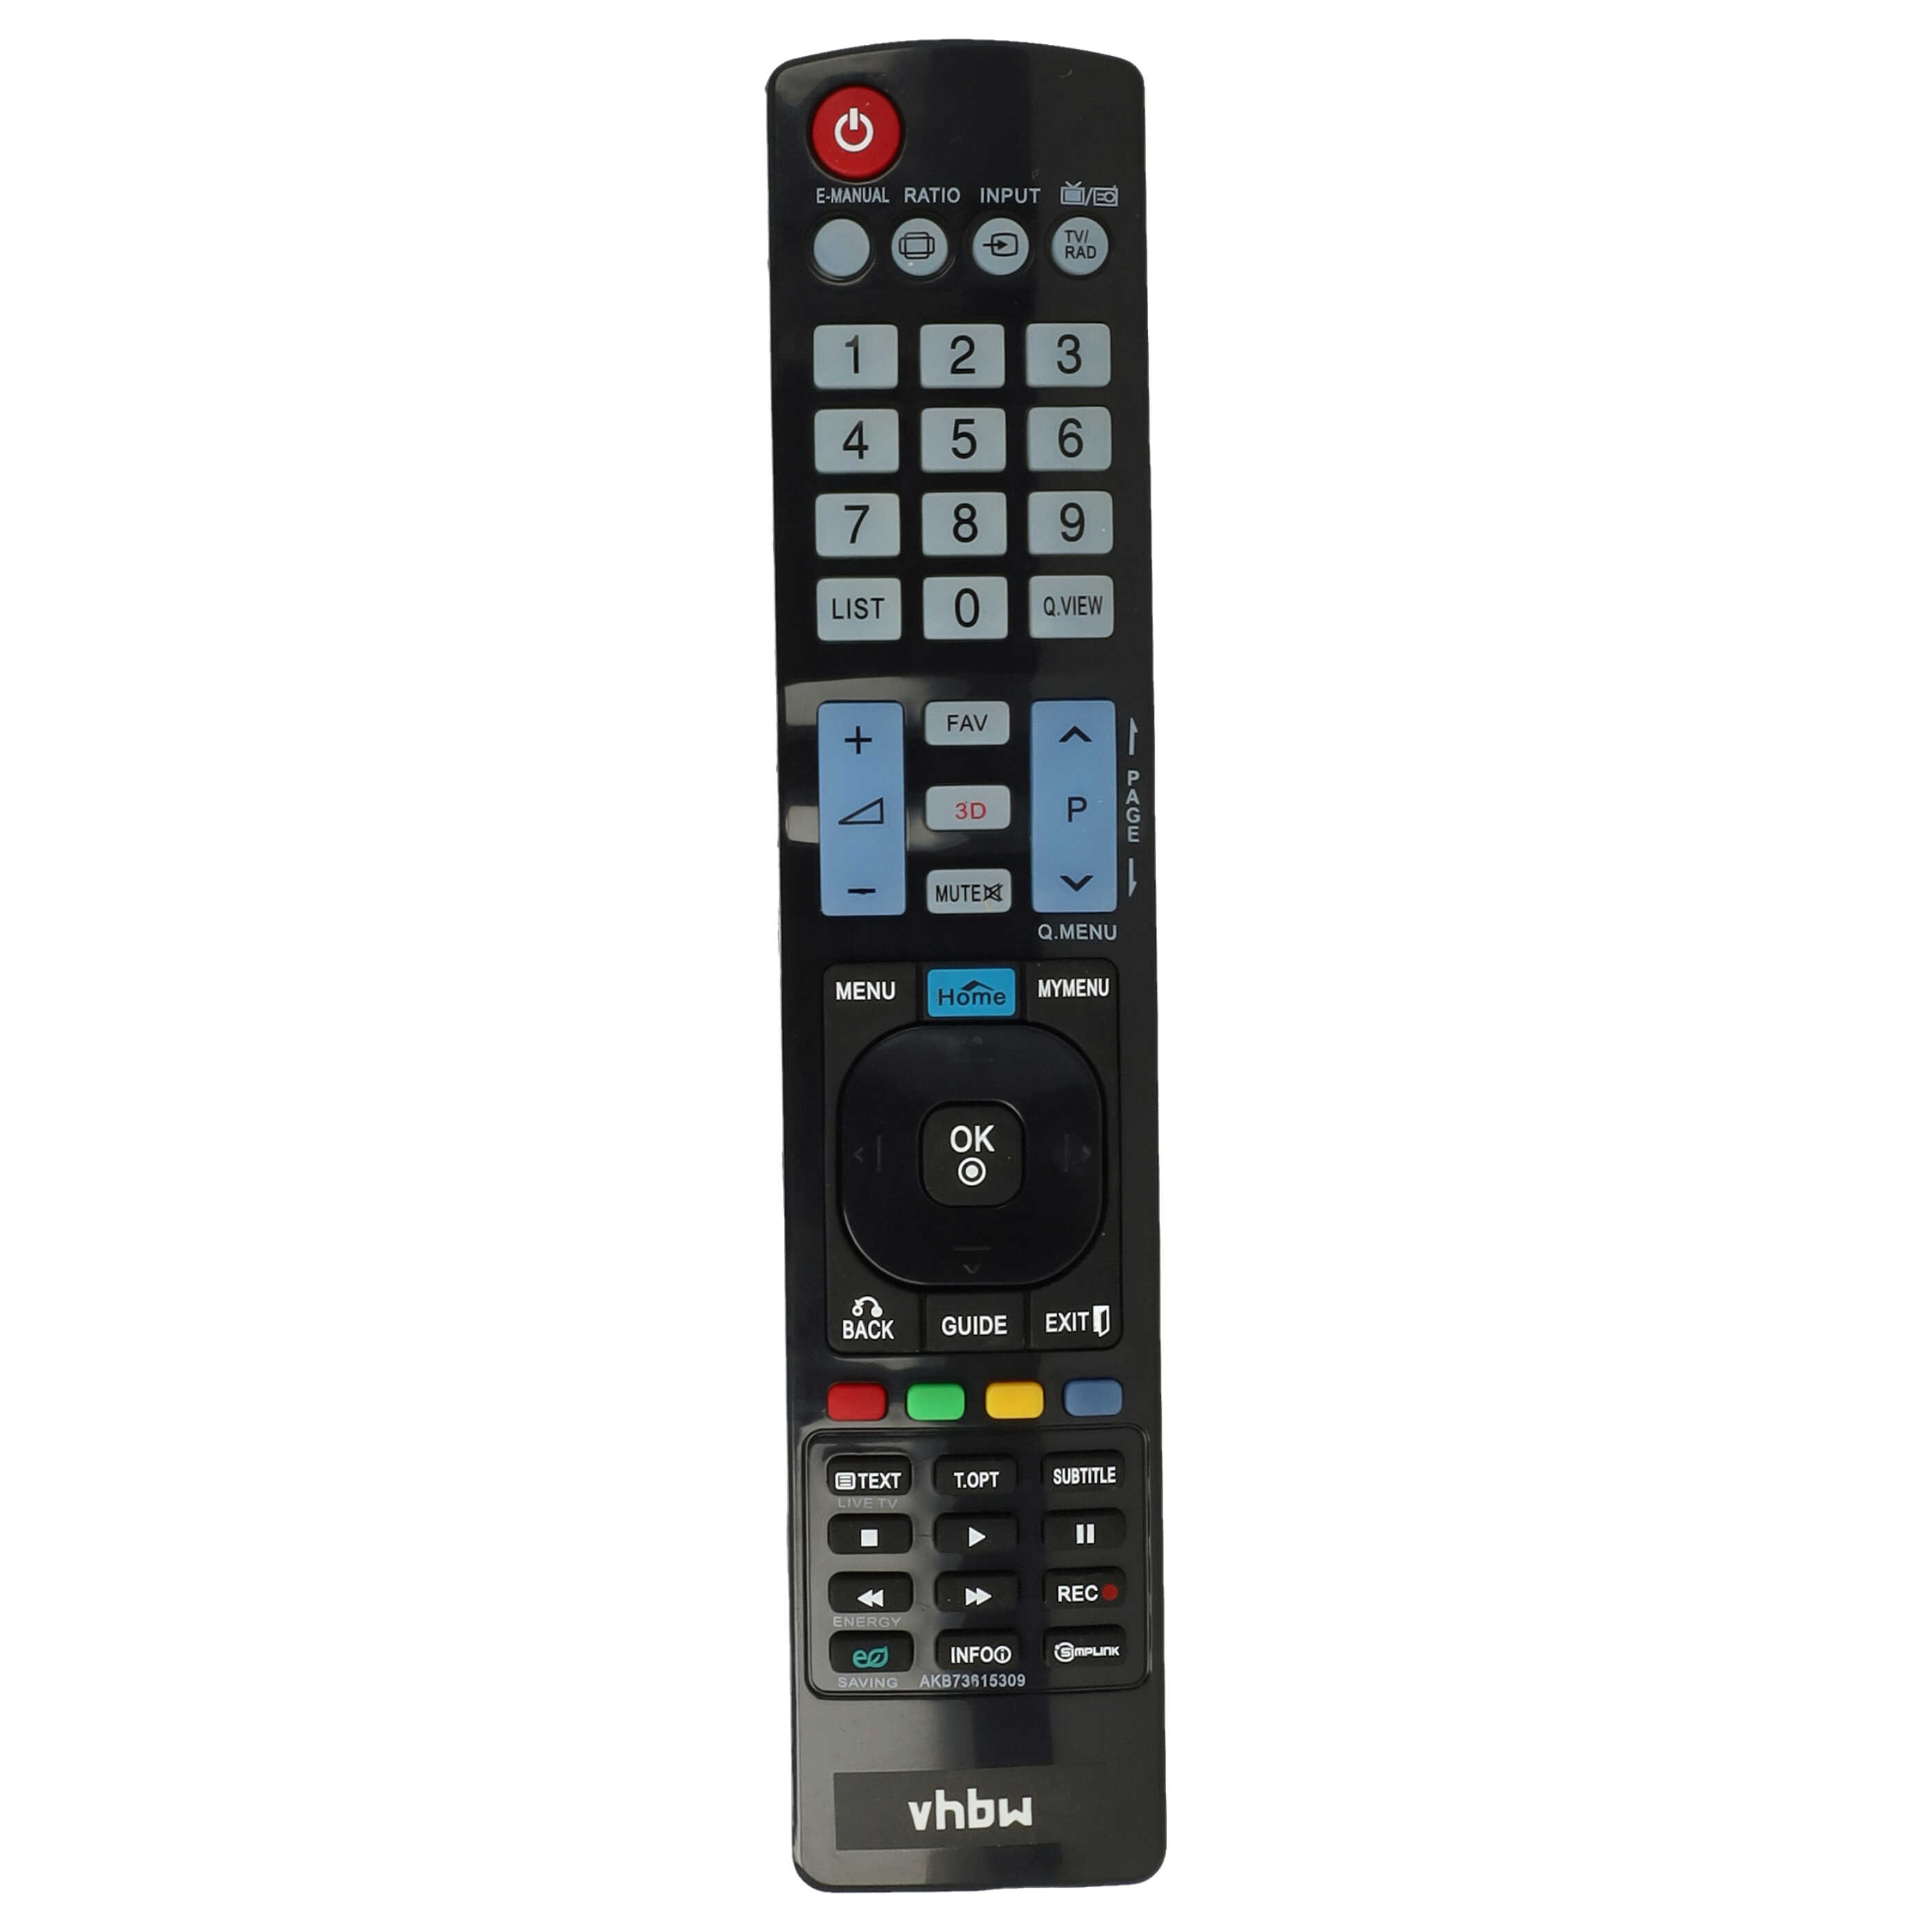 Remote Control replaces LG AKB73615309 for LG TV